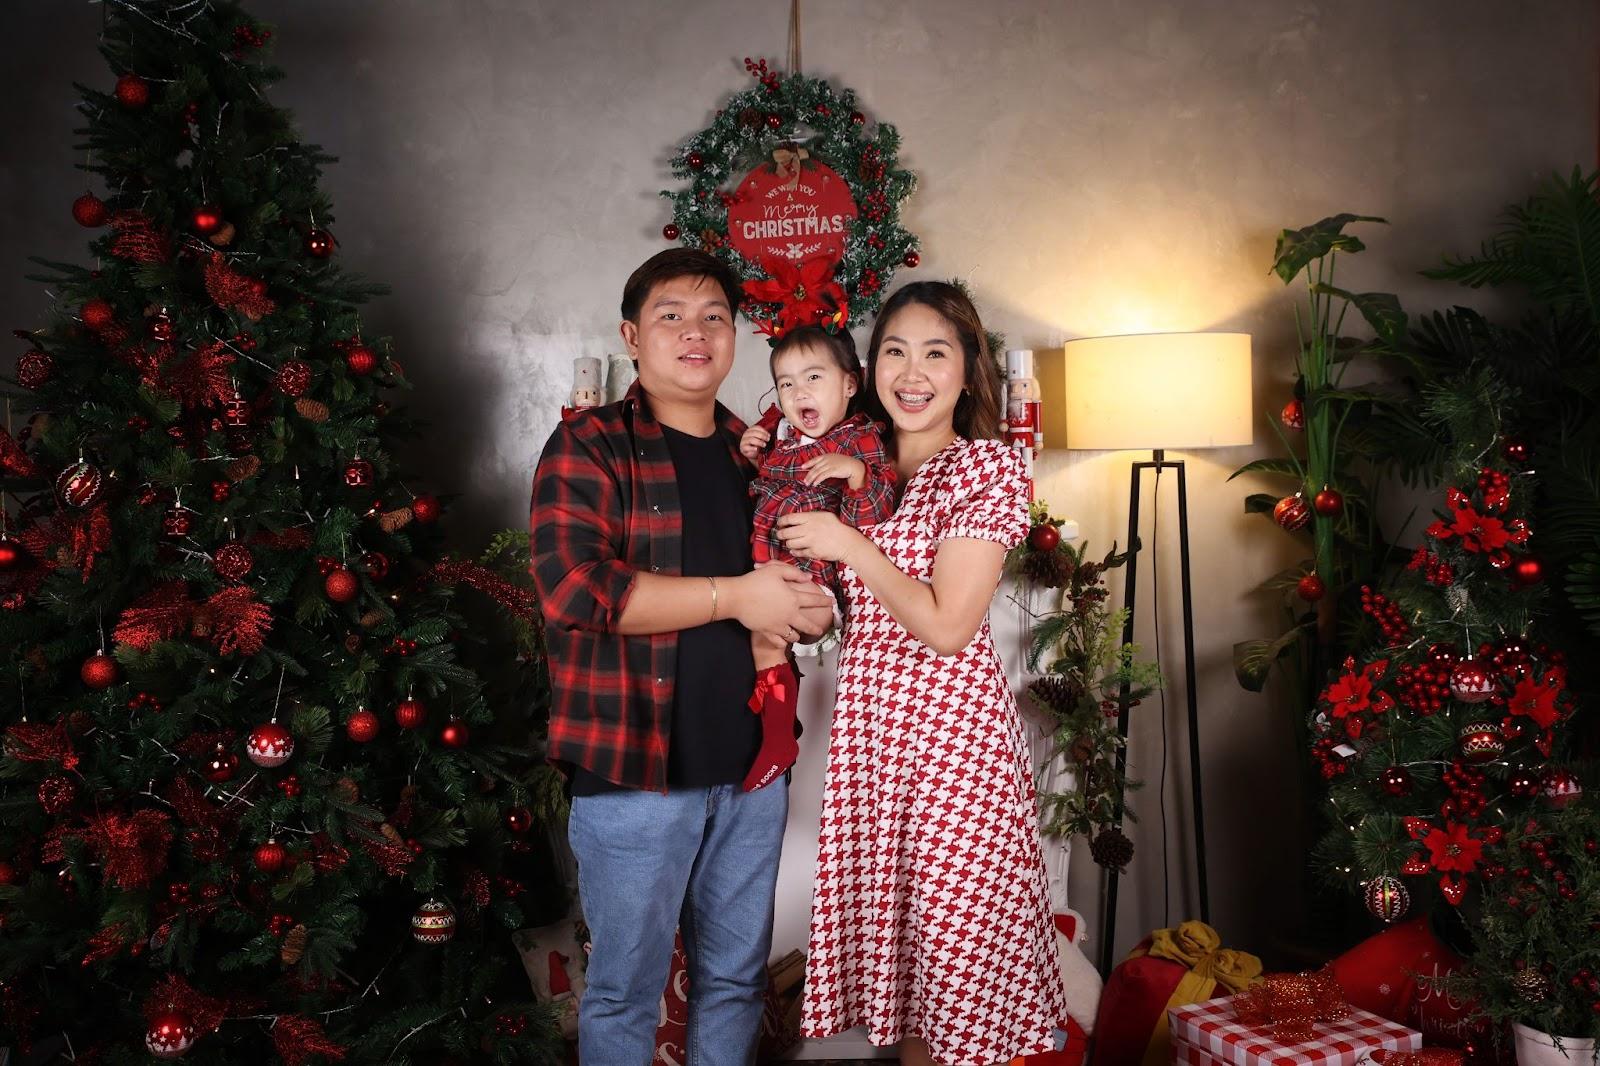 Family Christmas Photo Outfit Ideas: red plaid outfits for the holiday vibes for your christmas family photos